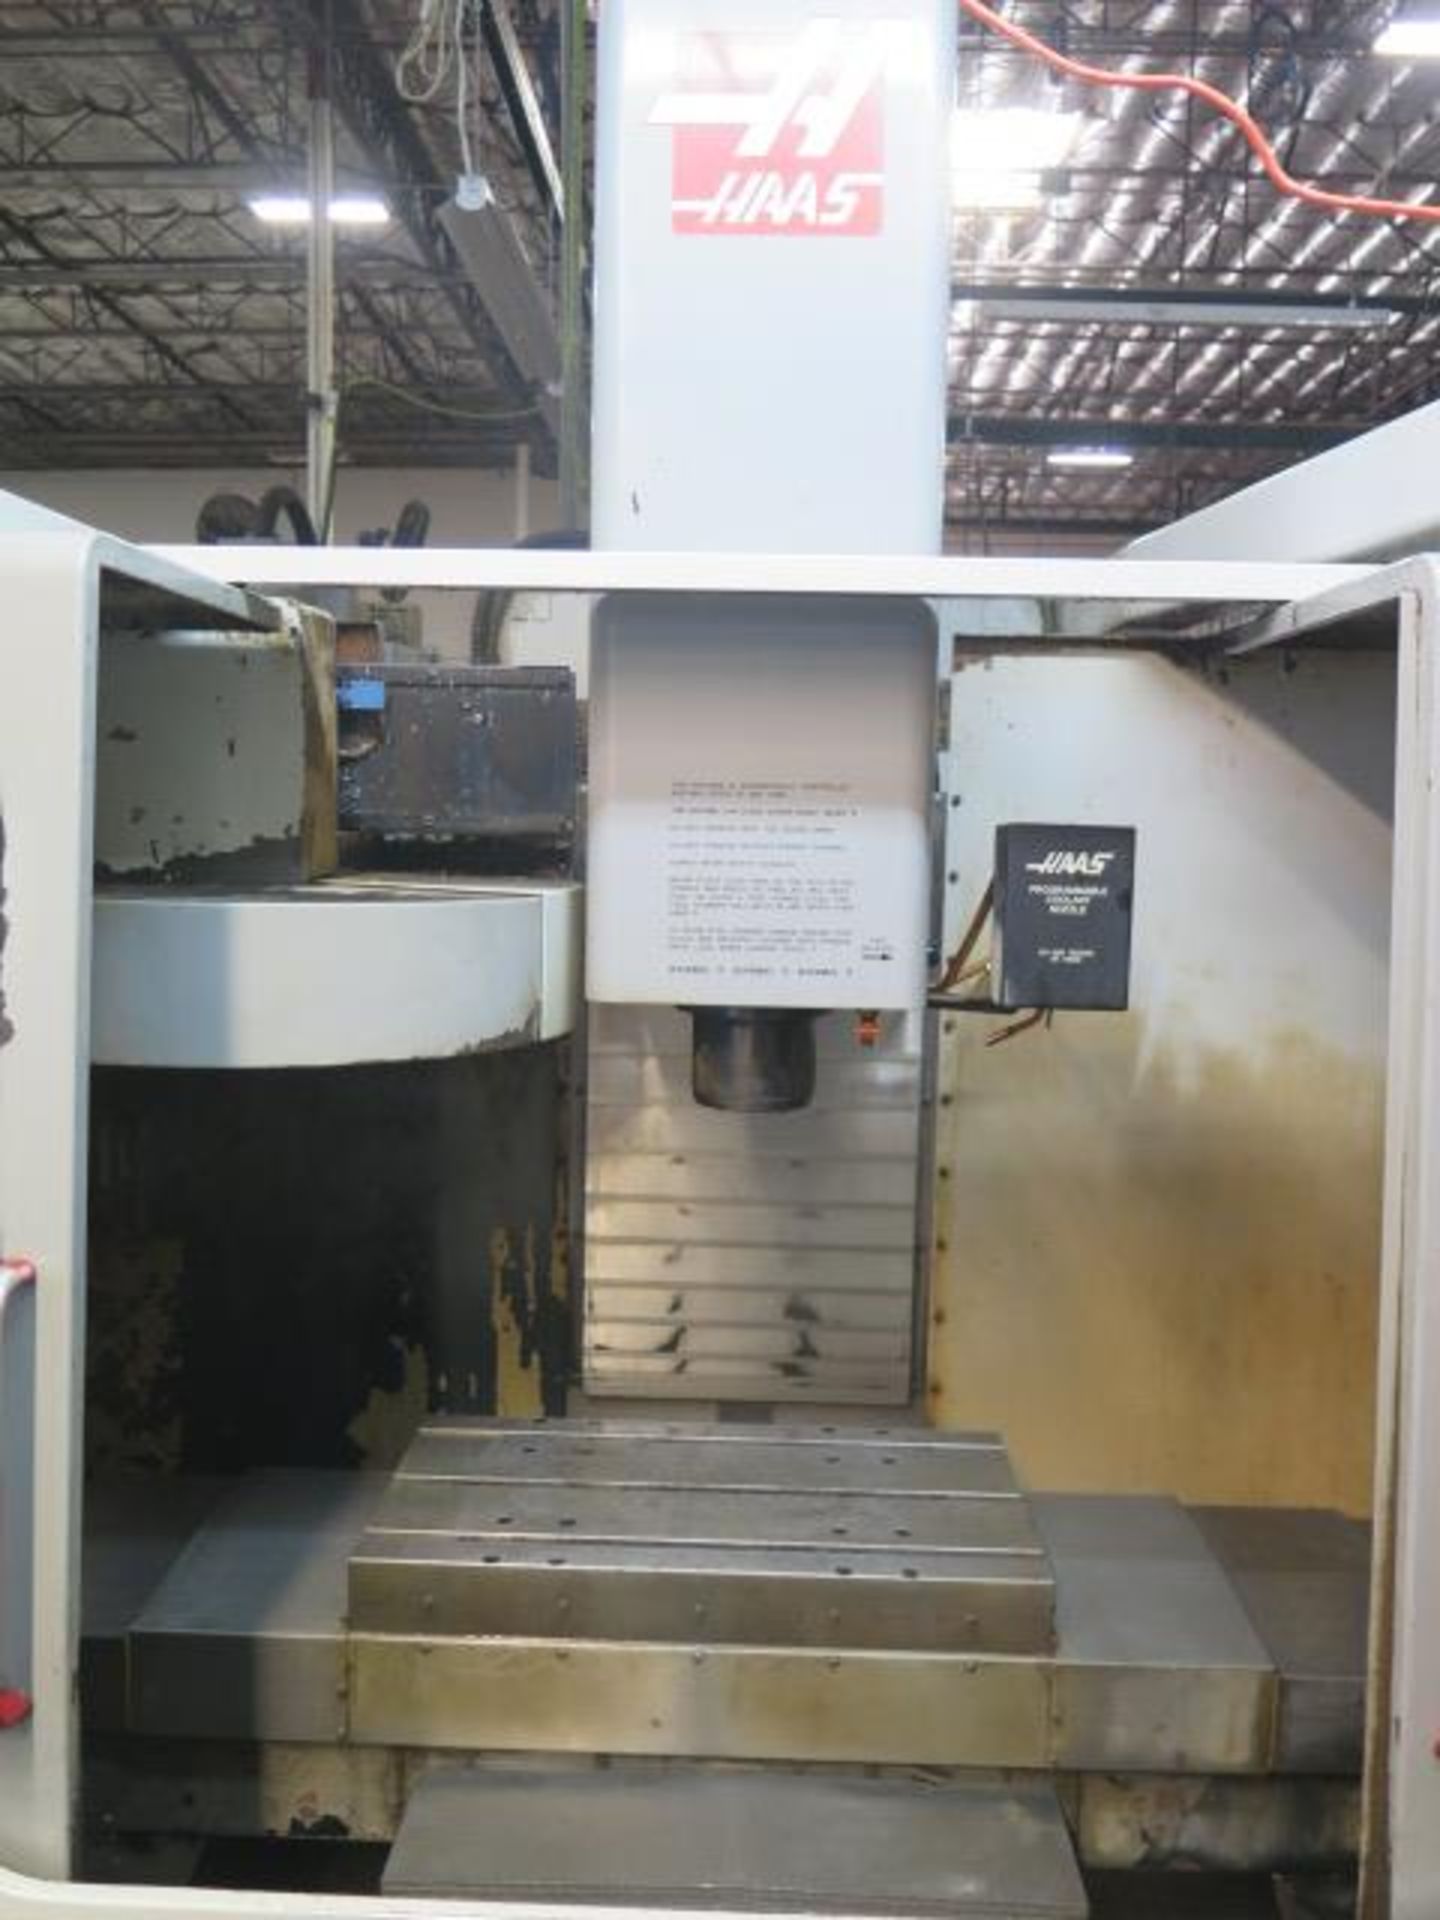 1999 Haas VF-0 CNC Vertical Machining Center s/n 18534 w/ Haas Controls, 20-Station ATC, CAT-40 - Image 4 of 14